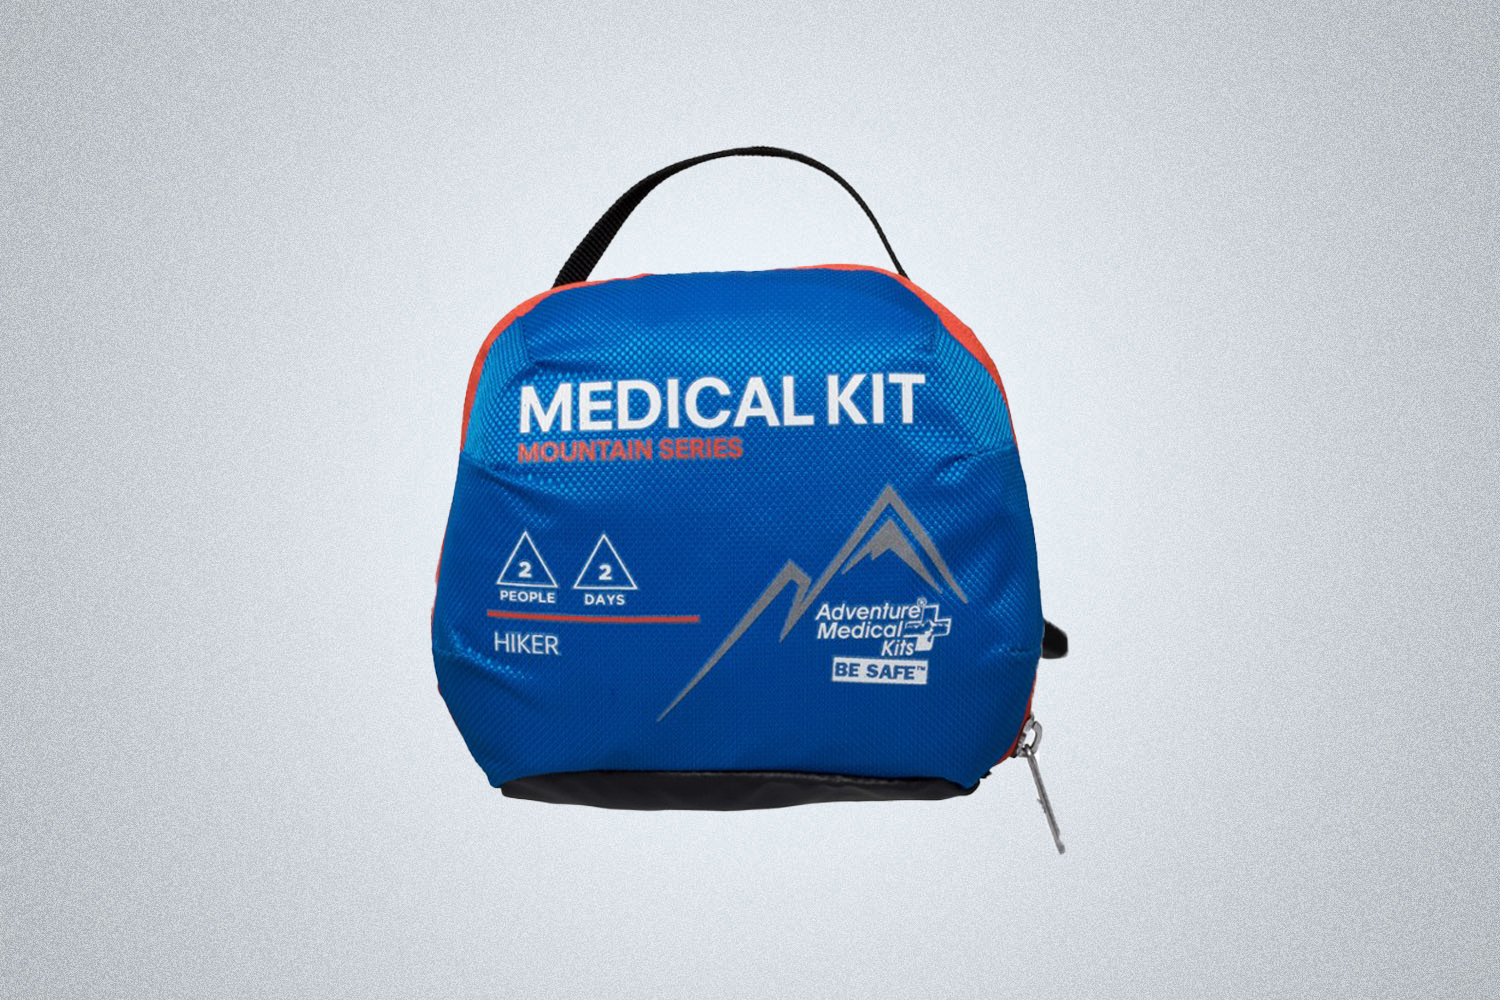 The Adventure Medical Kits Mountain Series Hiker Medical Kit is the best kit for car emergencies in winter 2022